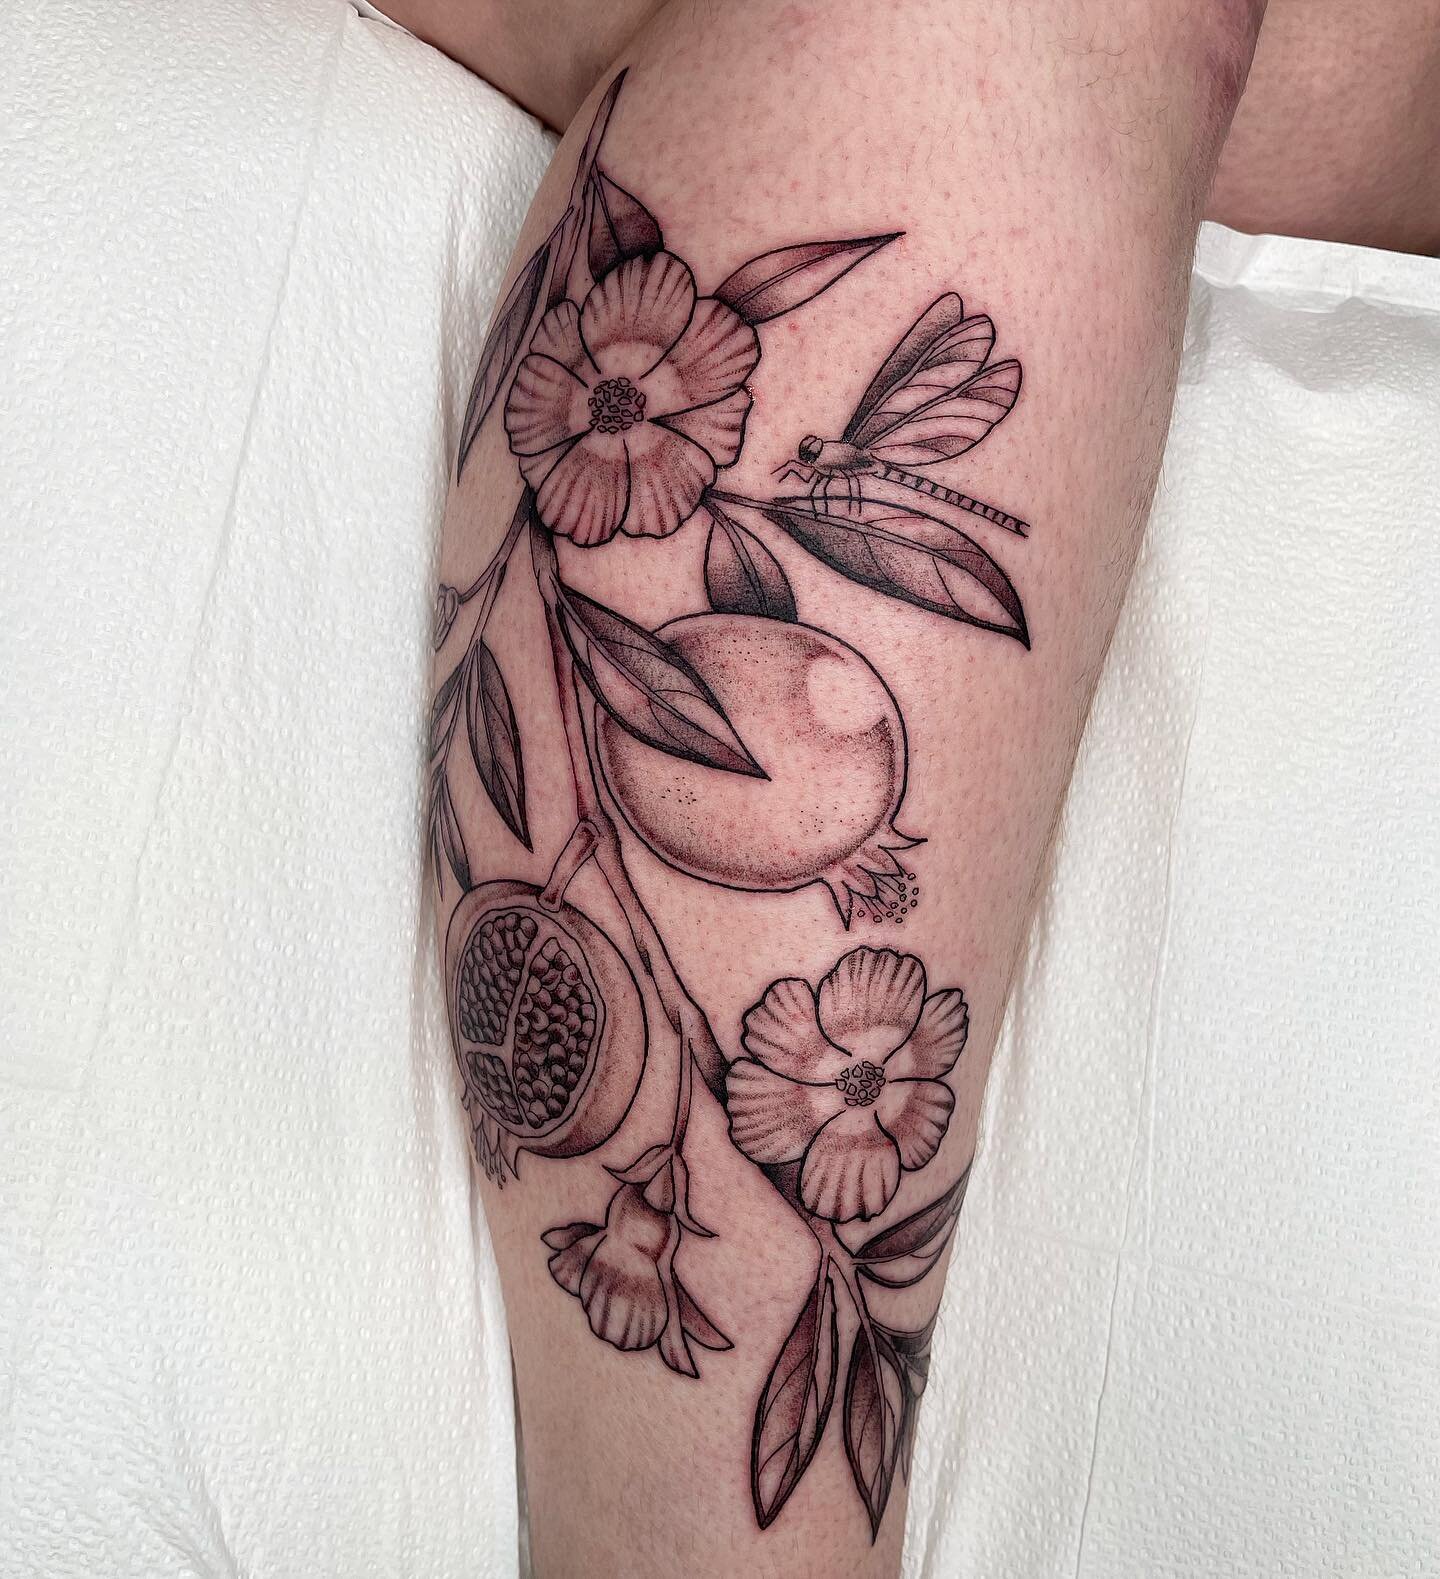 love this one for Aubrey 🌸 thanks for goin big! So fun. Still booking for Chicago! Booking form is on my website :) 
.
.
.
.
.
.
.
.
.
.
#eugenetattoo #eugeneoregon #eugene #oregon #oregontattoo #pnw #pnwtattoo #pomegranate #pomegranatetattoo #illus